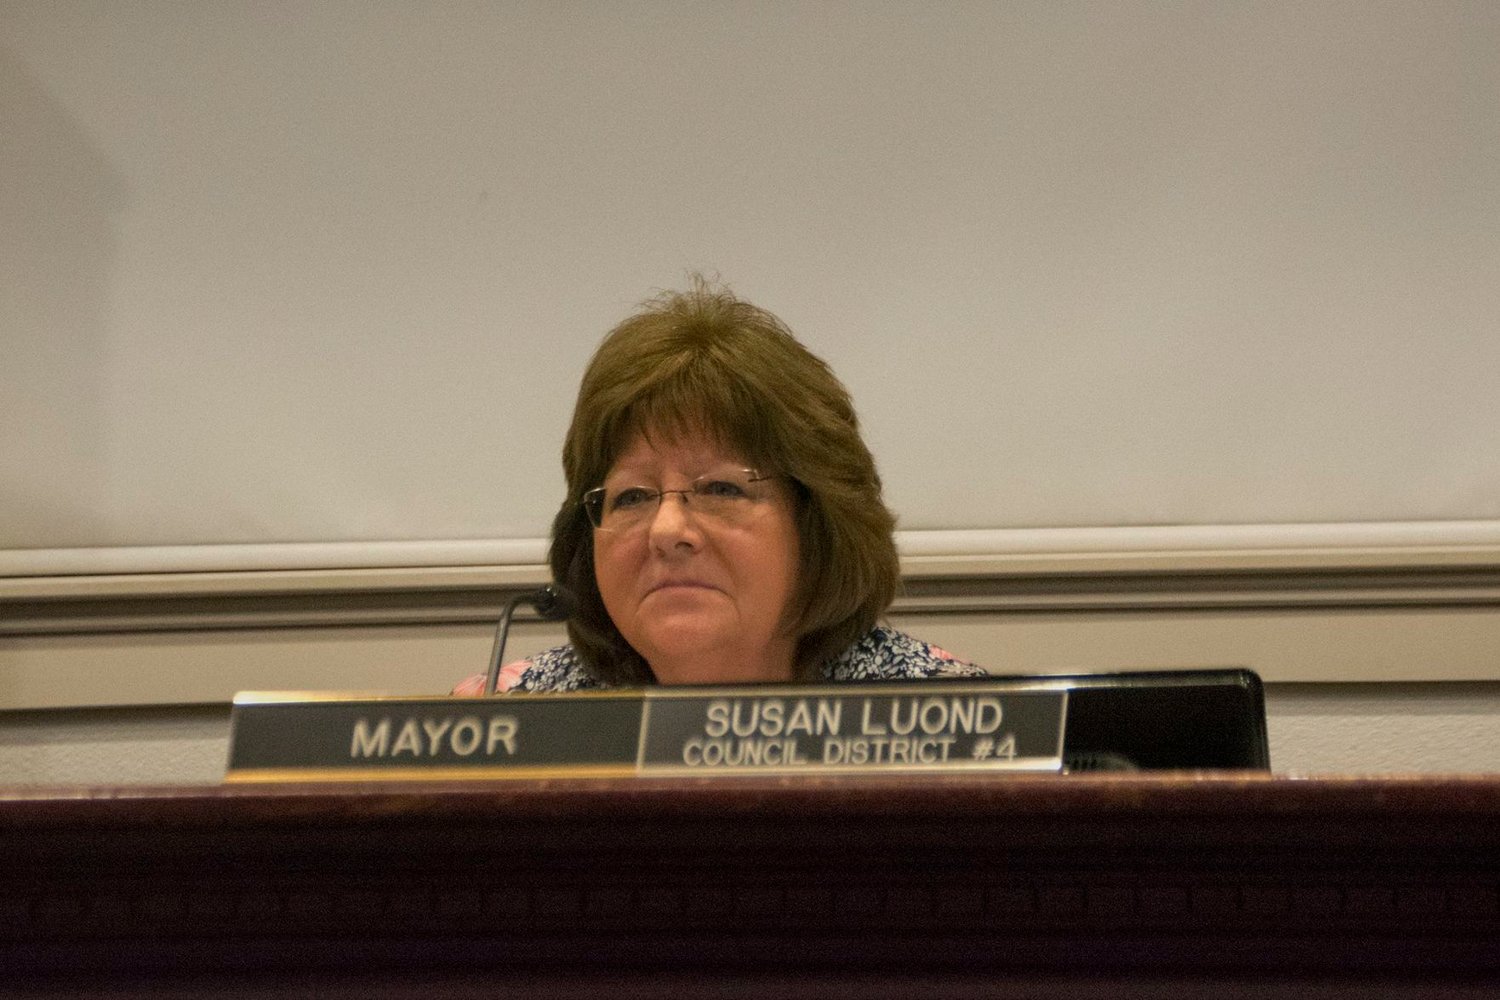 FILE PHOTO — Centralia Mayor Susan Luond appears at a meeting in 2019.